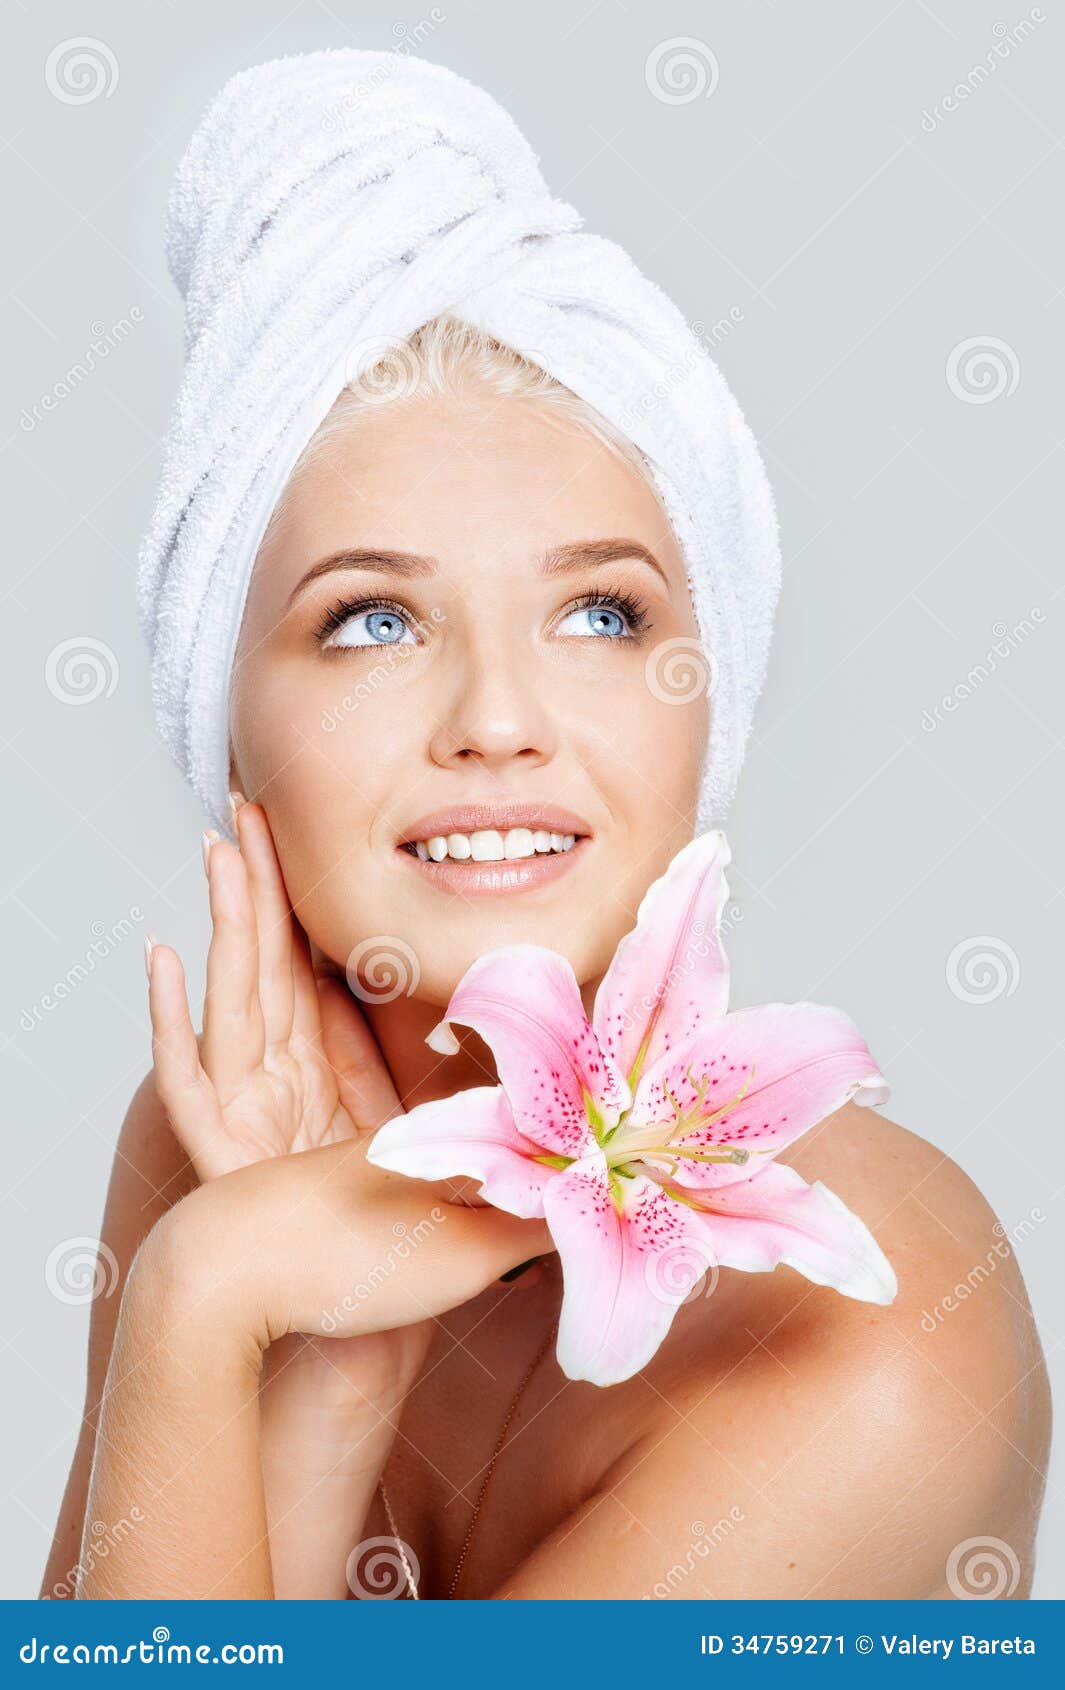 skincare-close-up-face-young-beautiful-woman-white-towel-pink-lily-gray-background-34759271.jpg